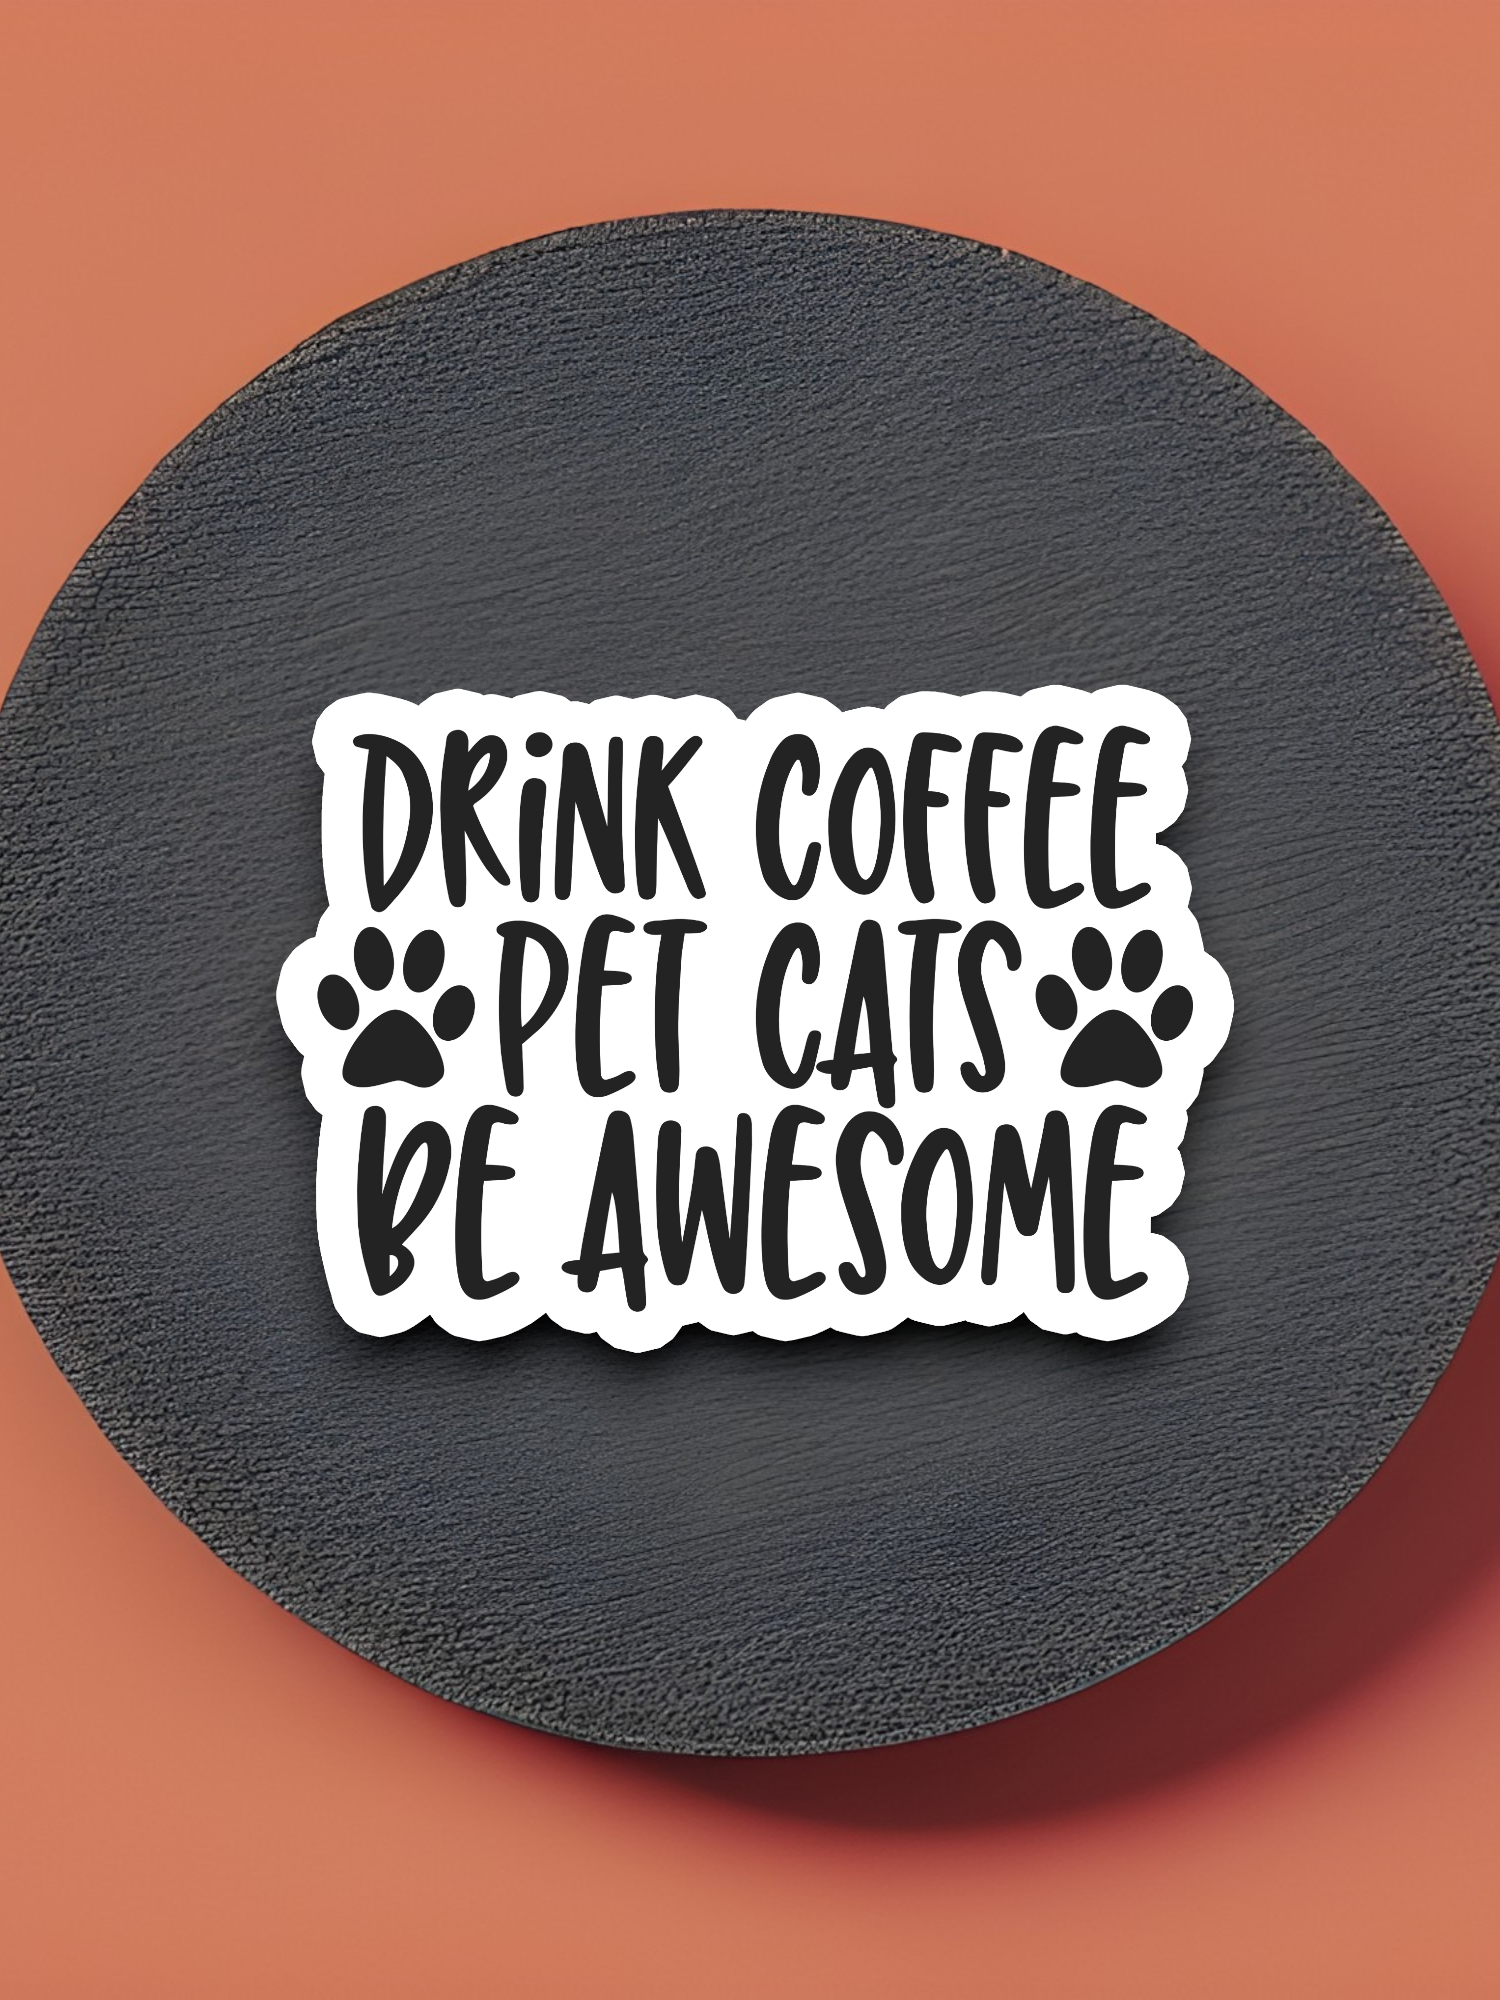 Drink Coffee Pet Cats Be Awesome - Coffee Sticker